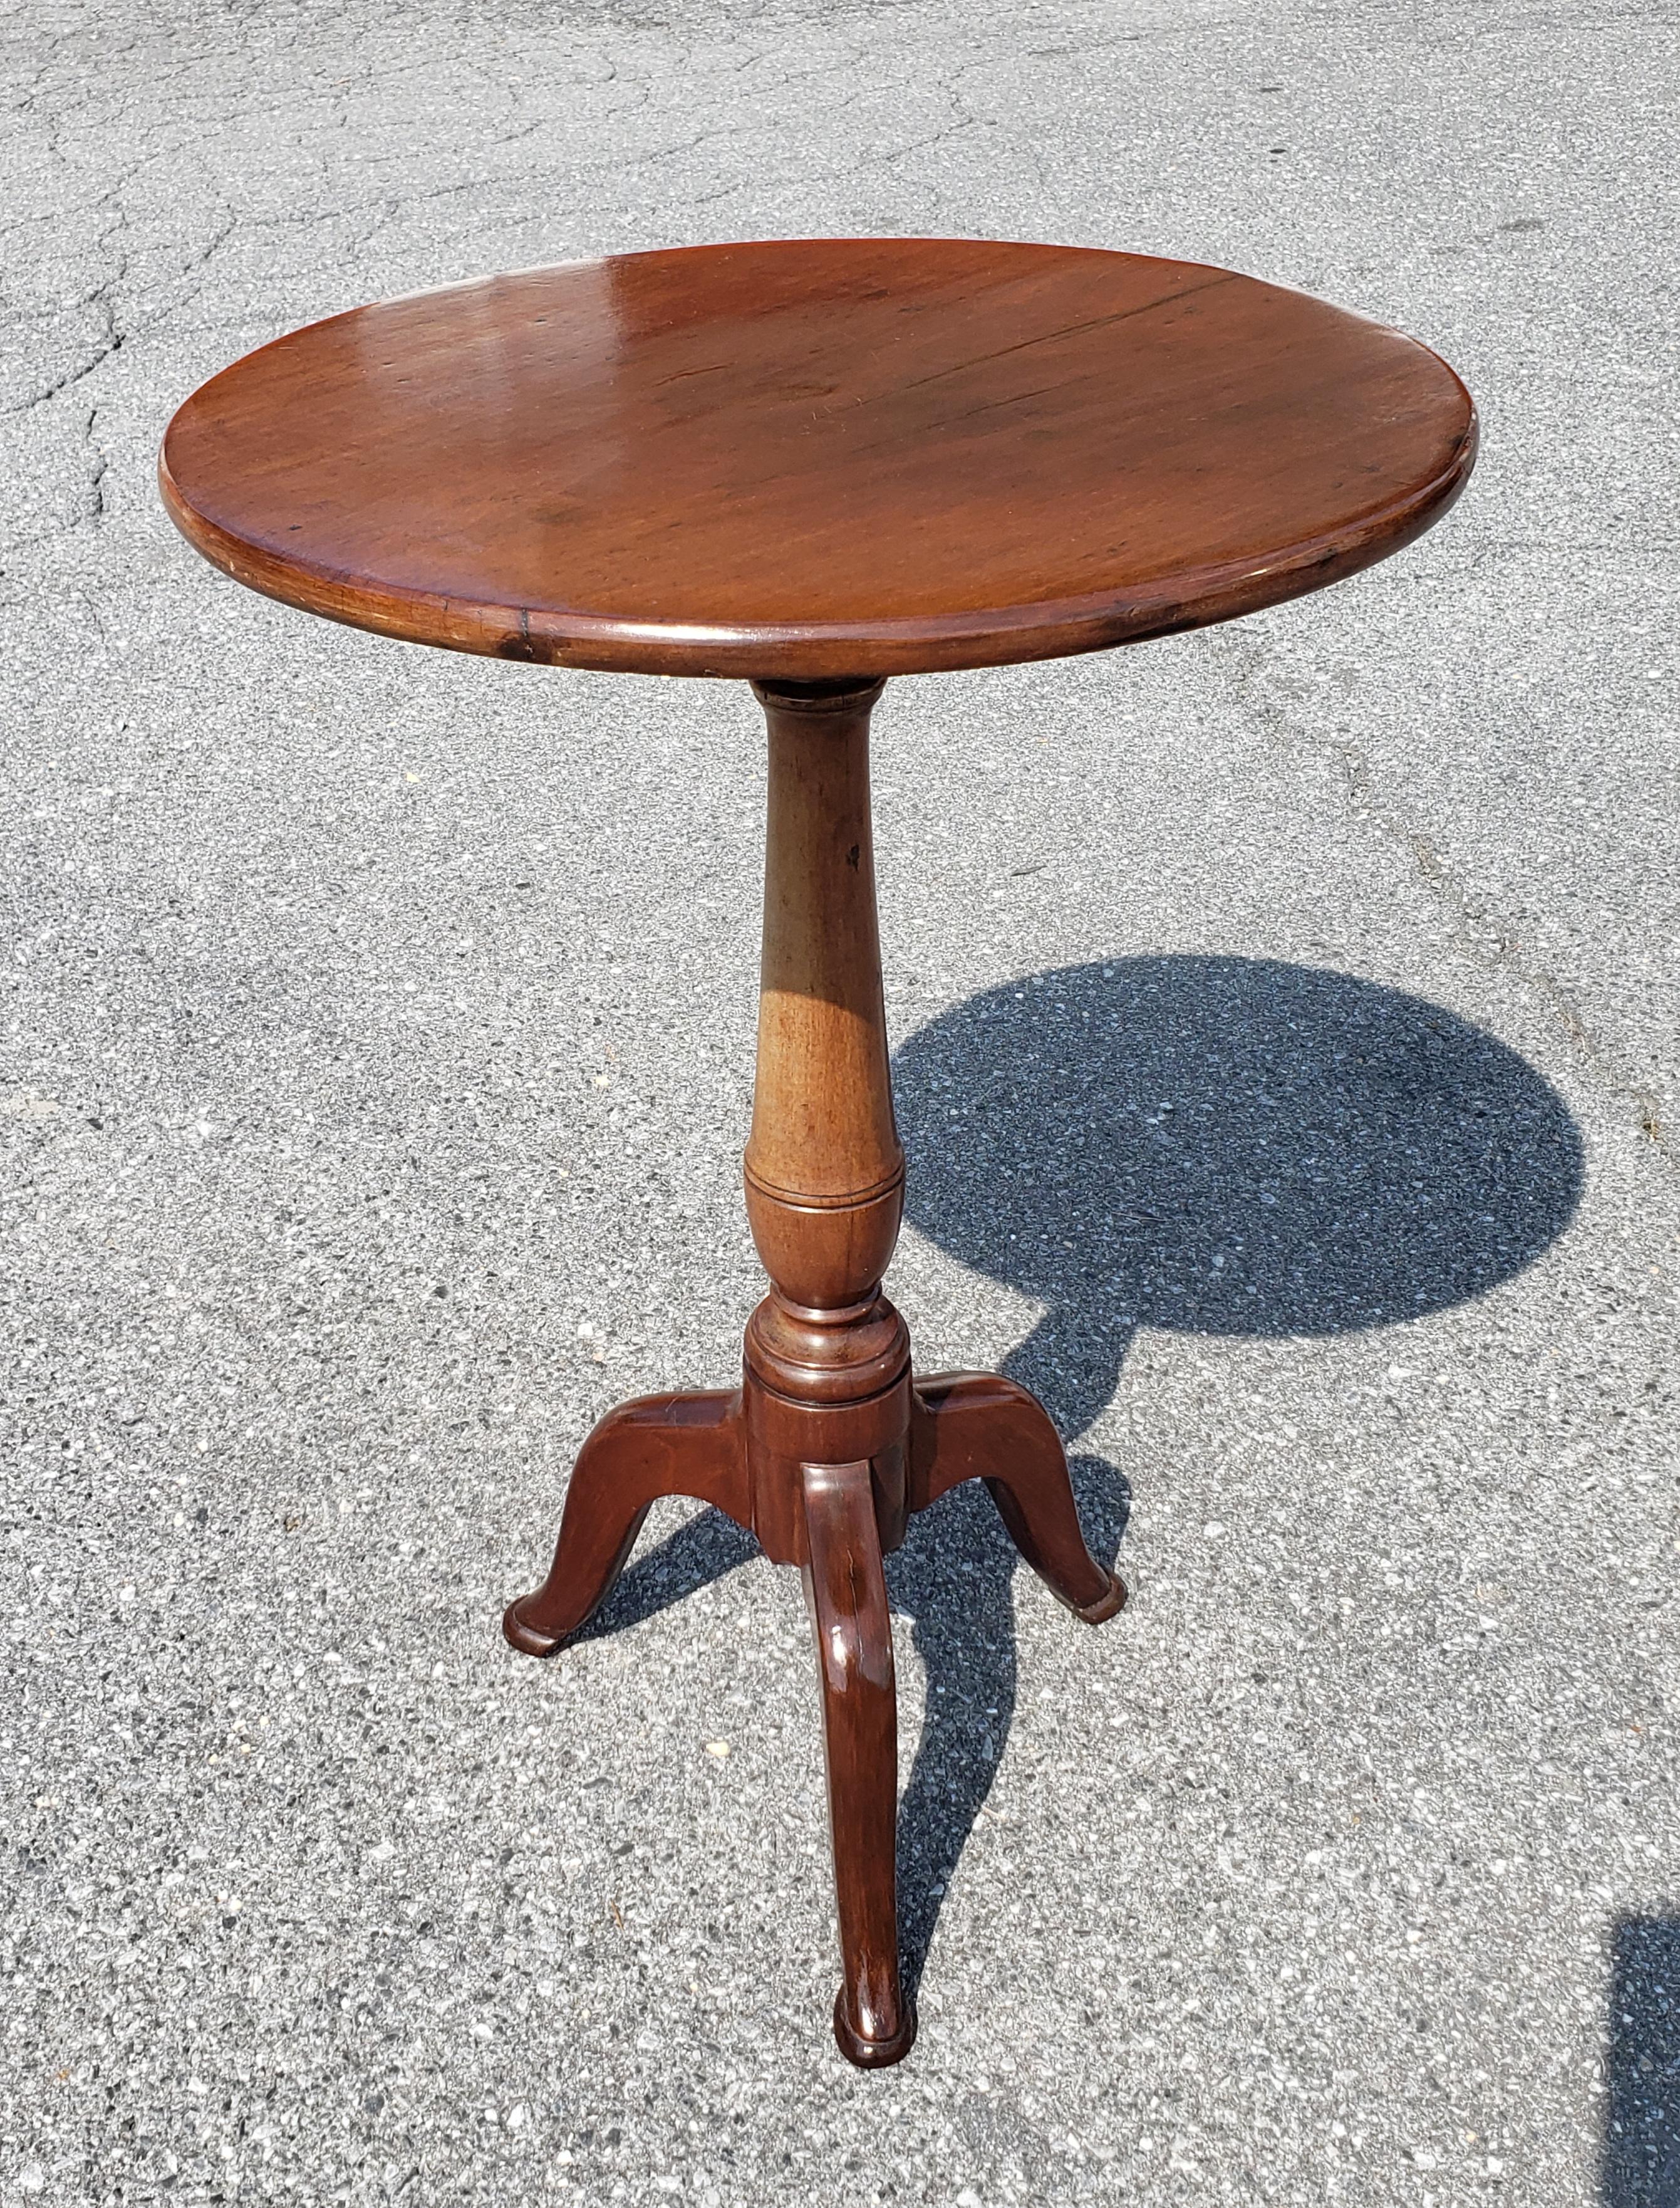 A 19th Century Victorian Mahogany Tripod Pedestal Candle Stand. Very sturdy. Measurse 18